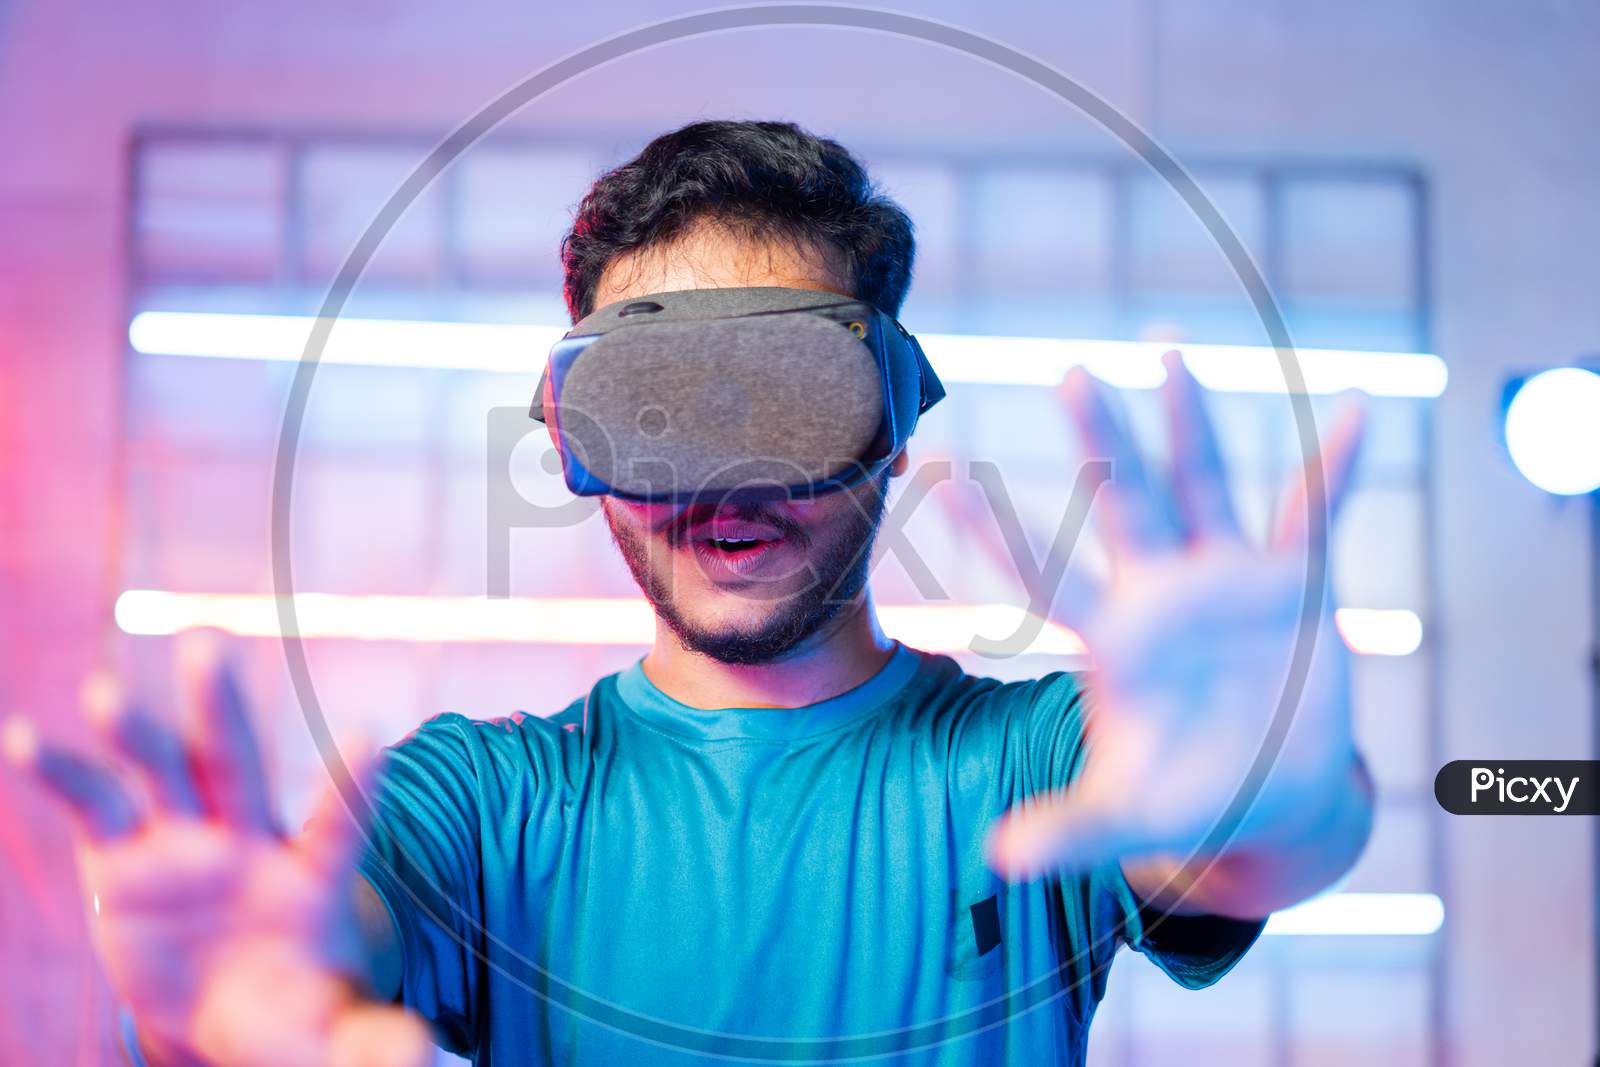 Amazed Young Man First Time Experiencing Vr Or Virtual Reality Headset On Neon Light Background - Concept Of Futuristic And Modern Technology.